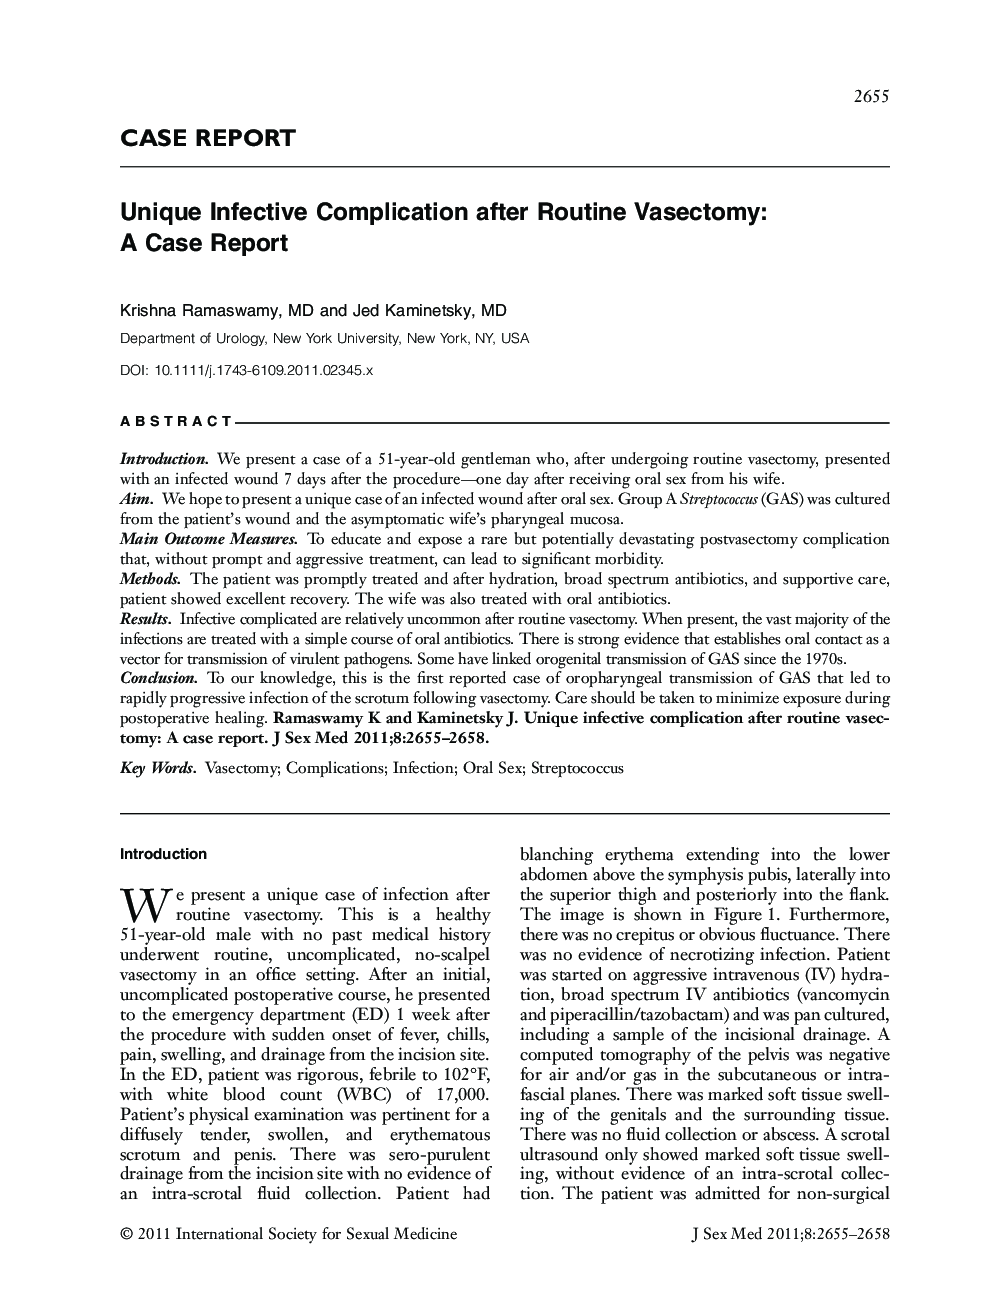 Unique Infective Complication after Routine Vasectomy: A Case Report